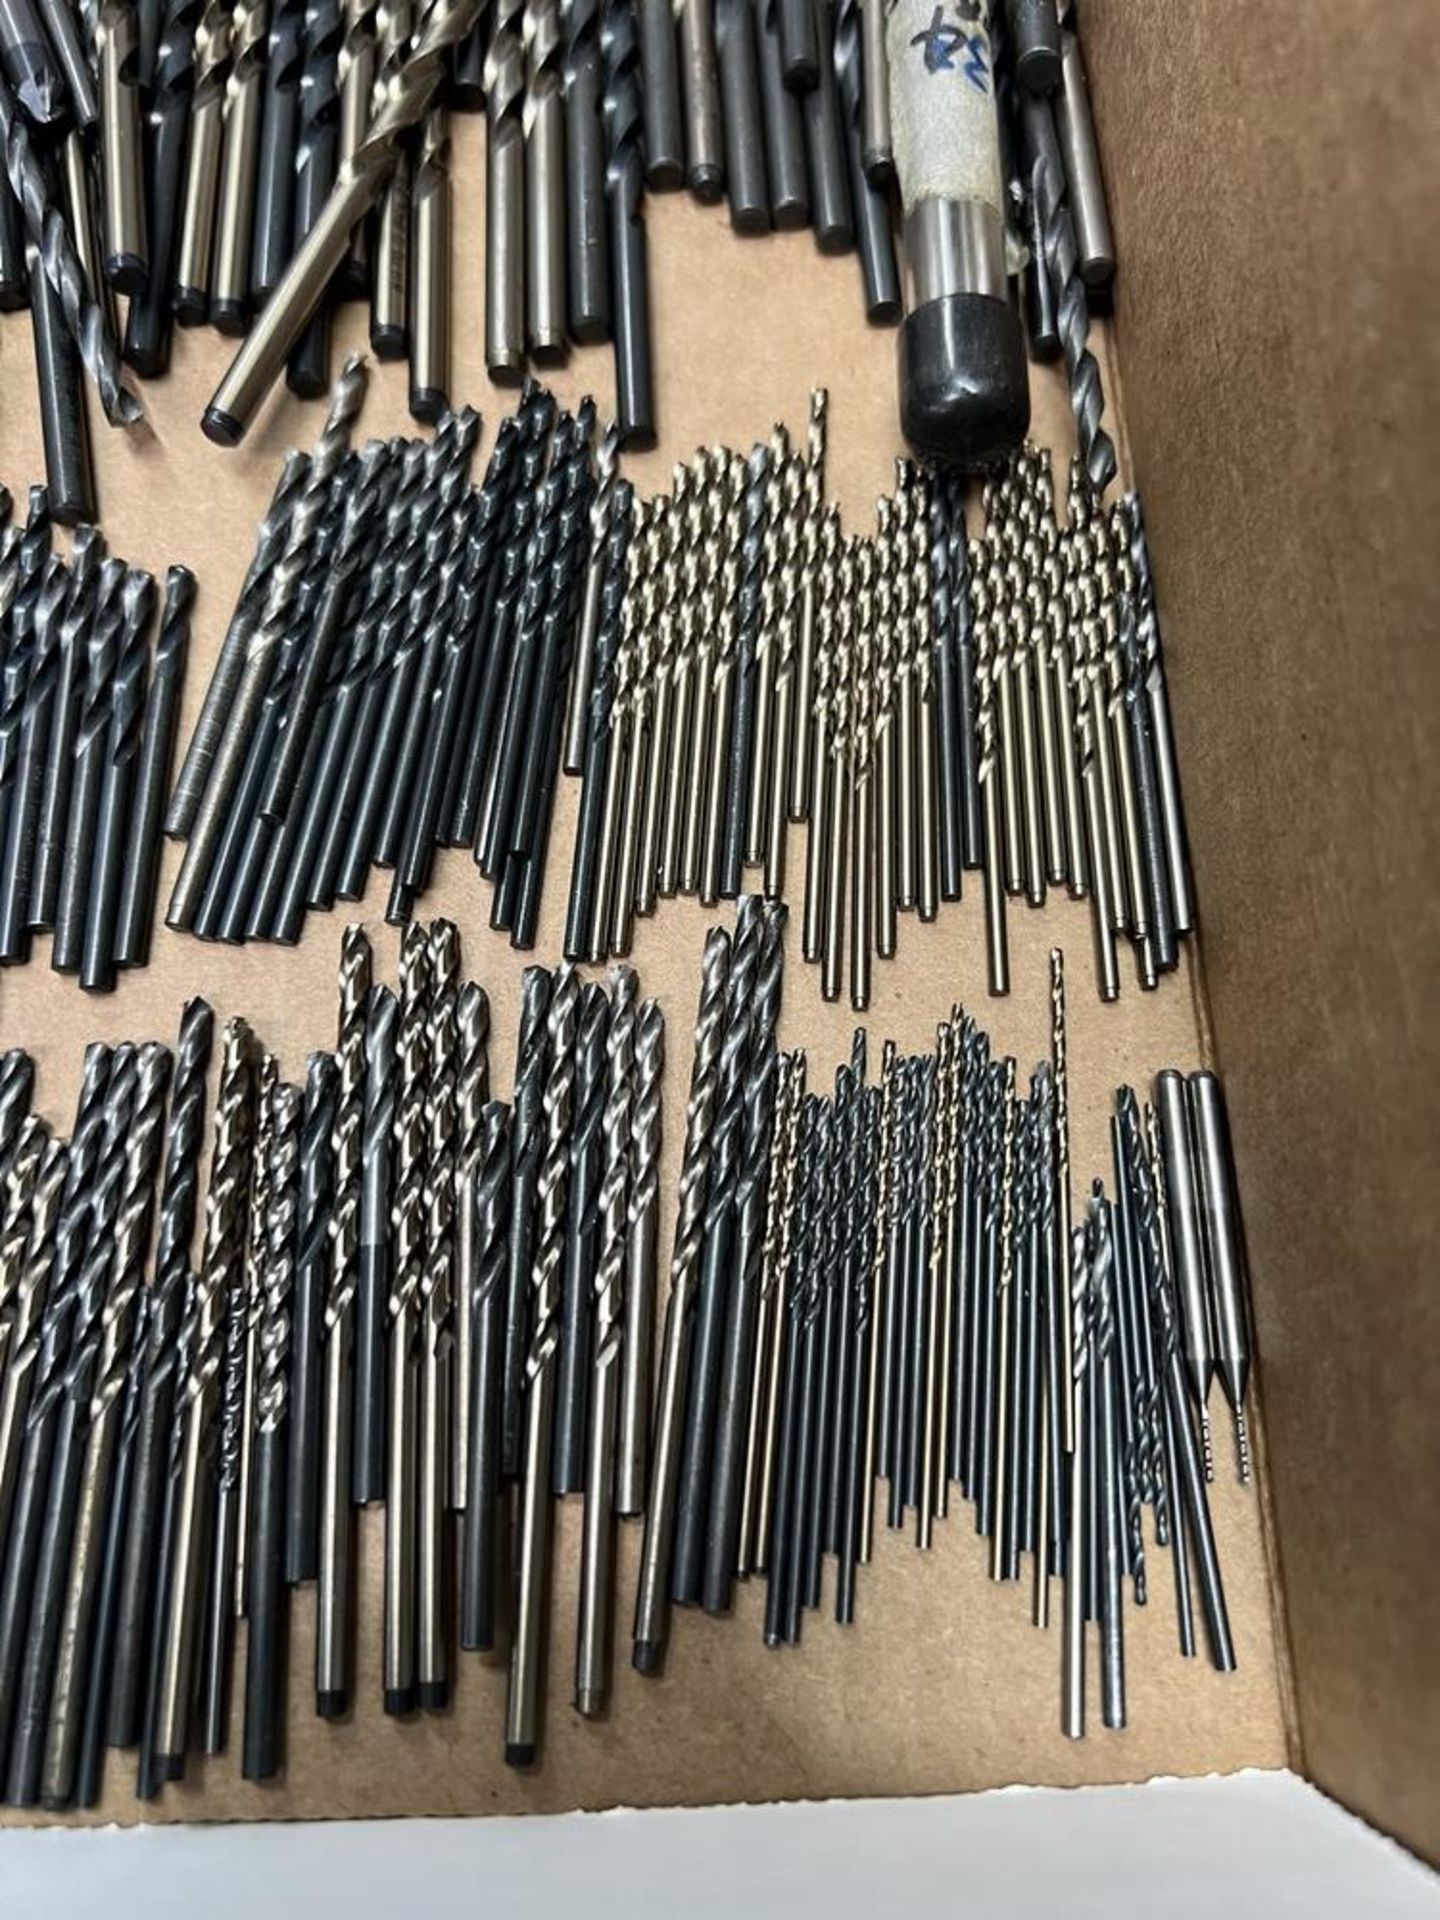 Box of Various Small to Medium Number Drills - Image 2 of 8